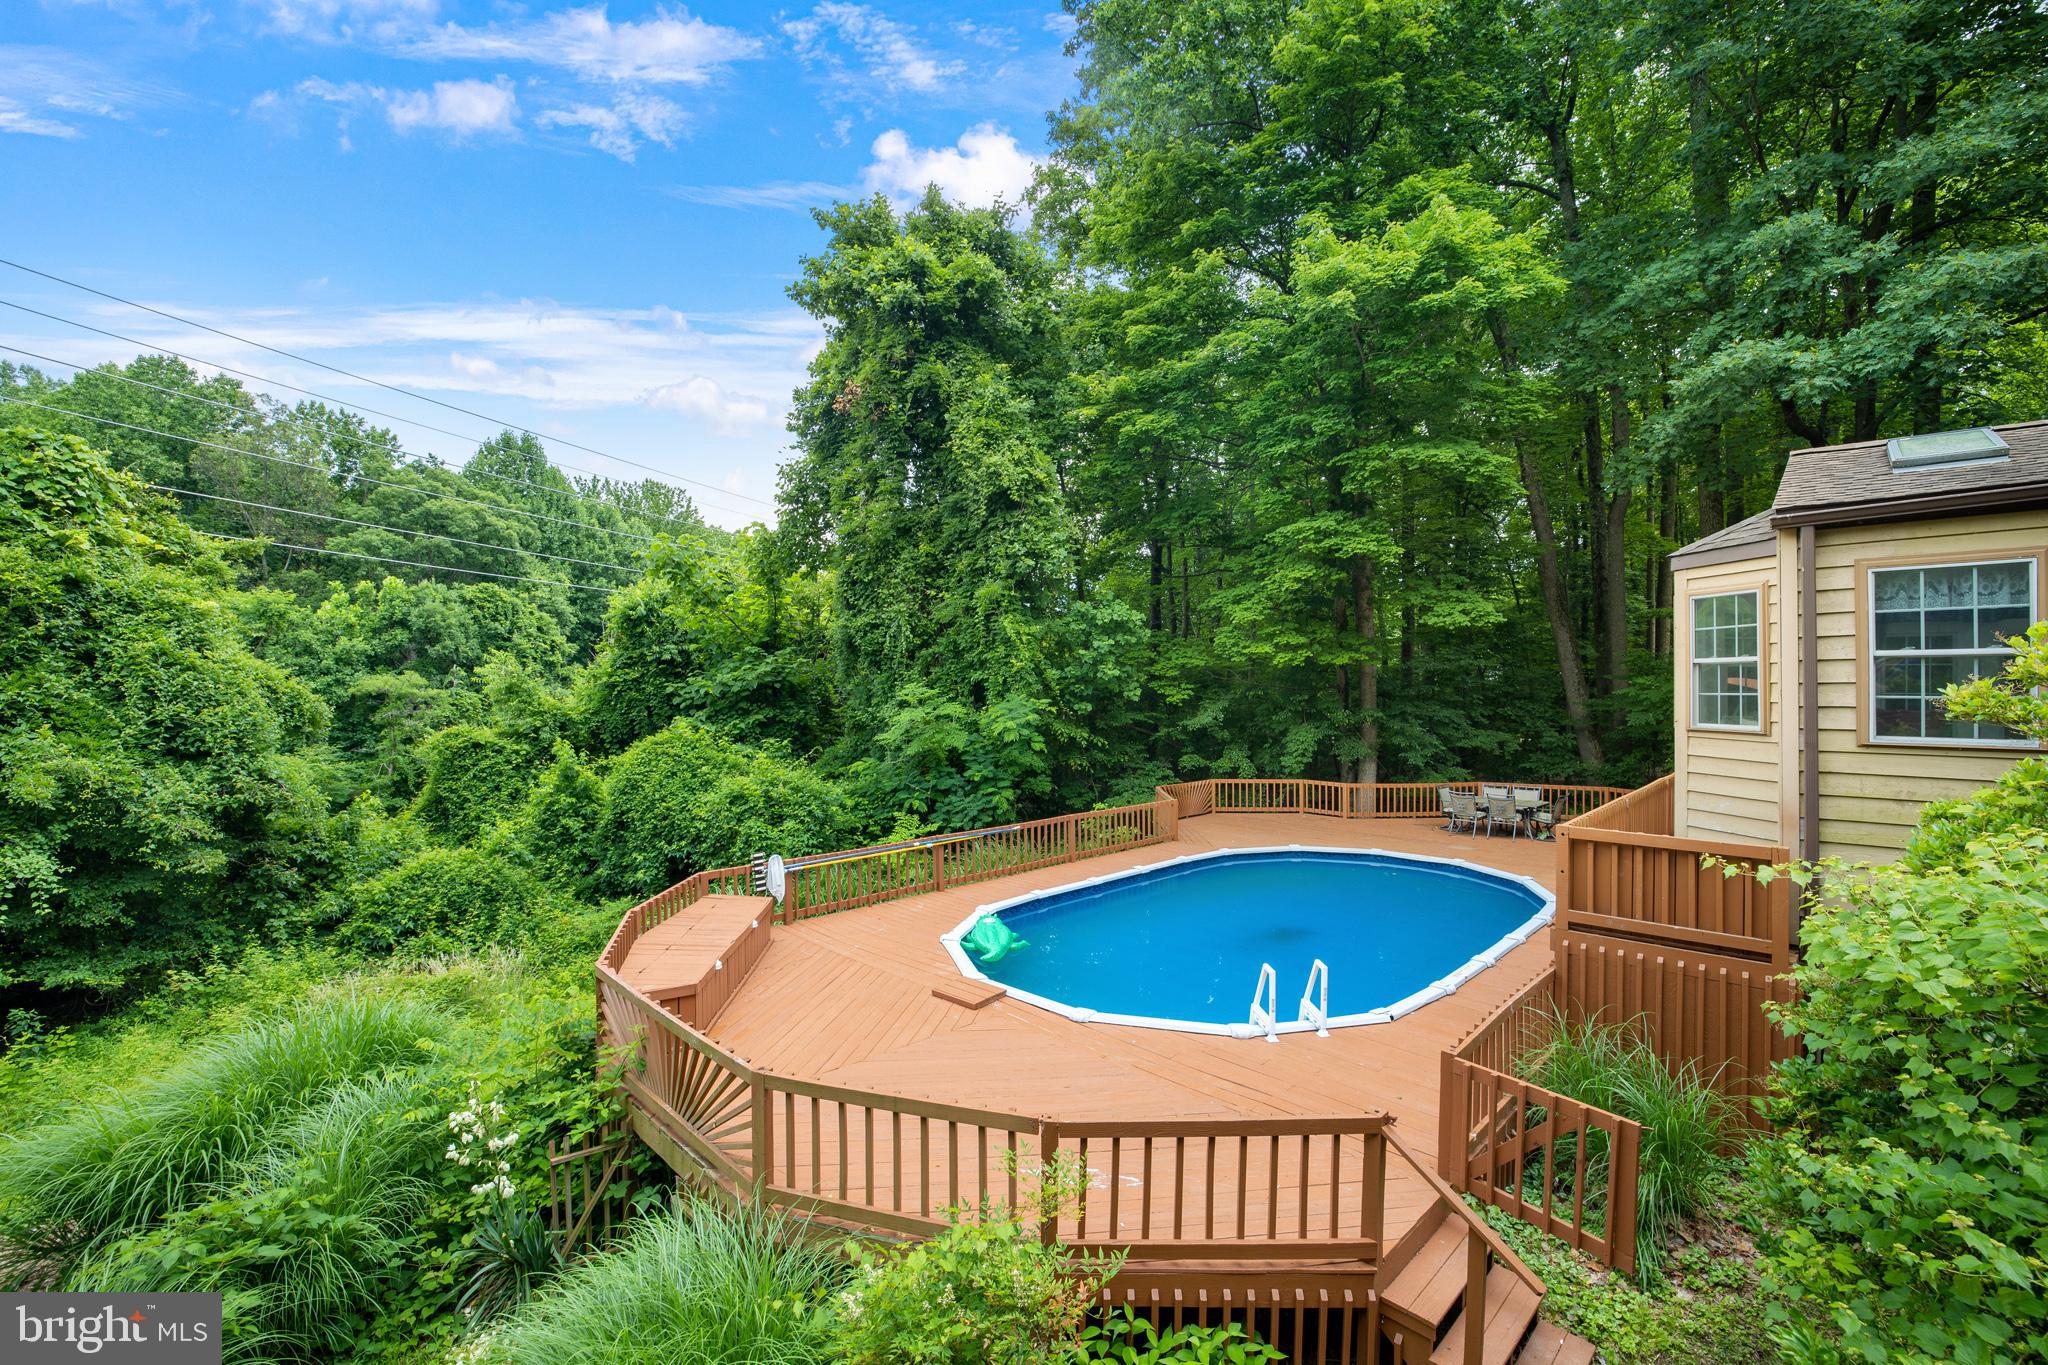 a view of a swimming pool and deck in the backyard